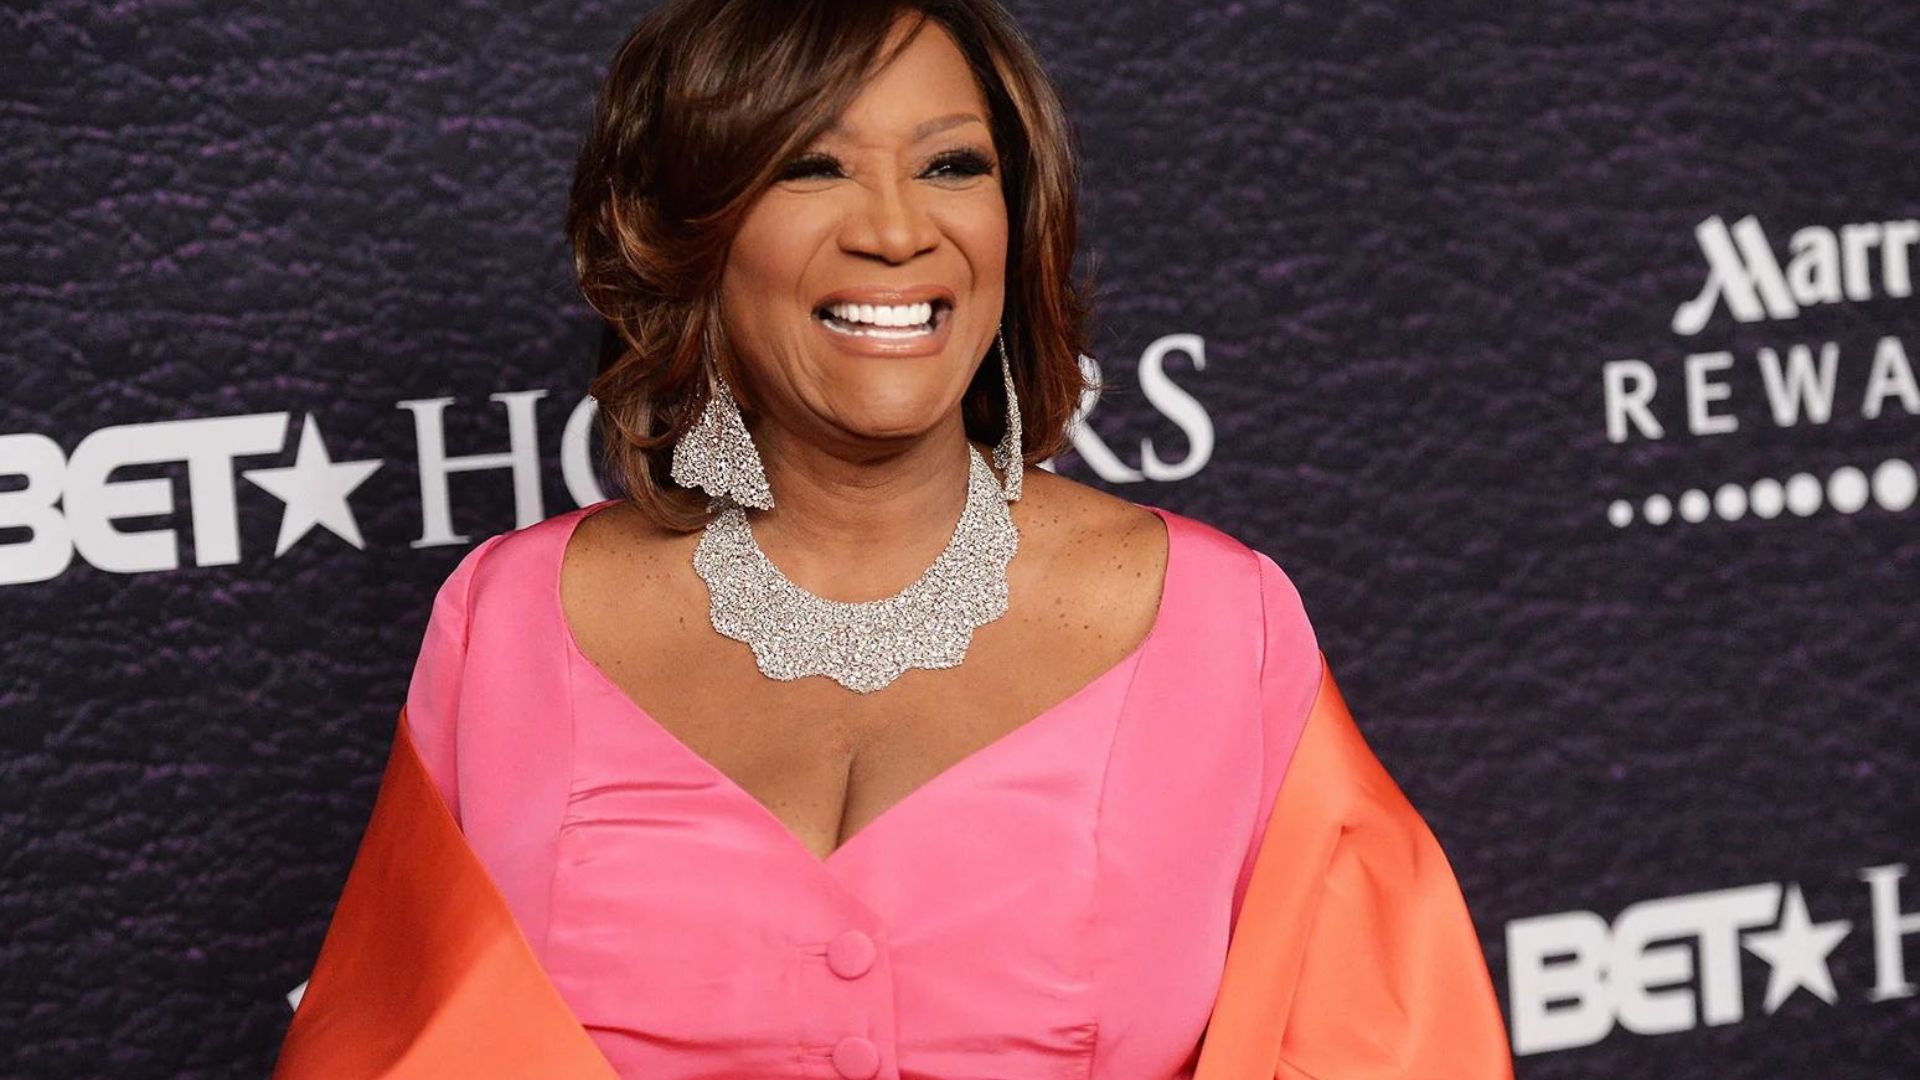 Patti LaBelle Smiling And Wearing Pink Dess